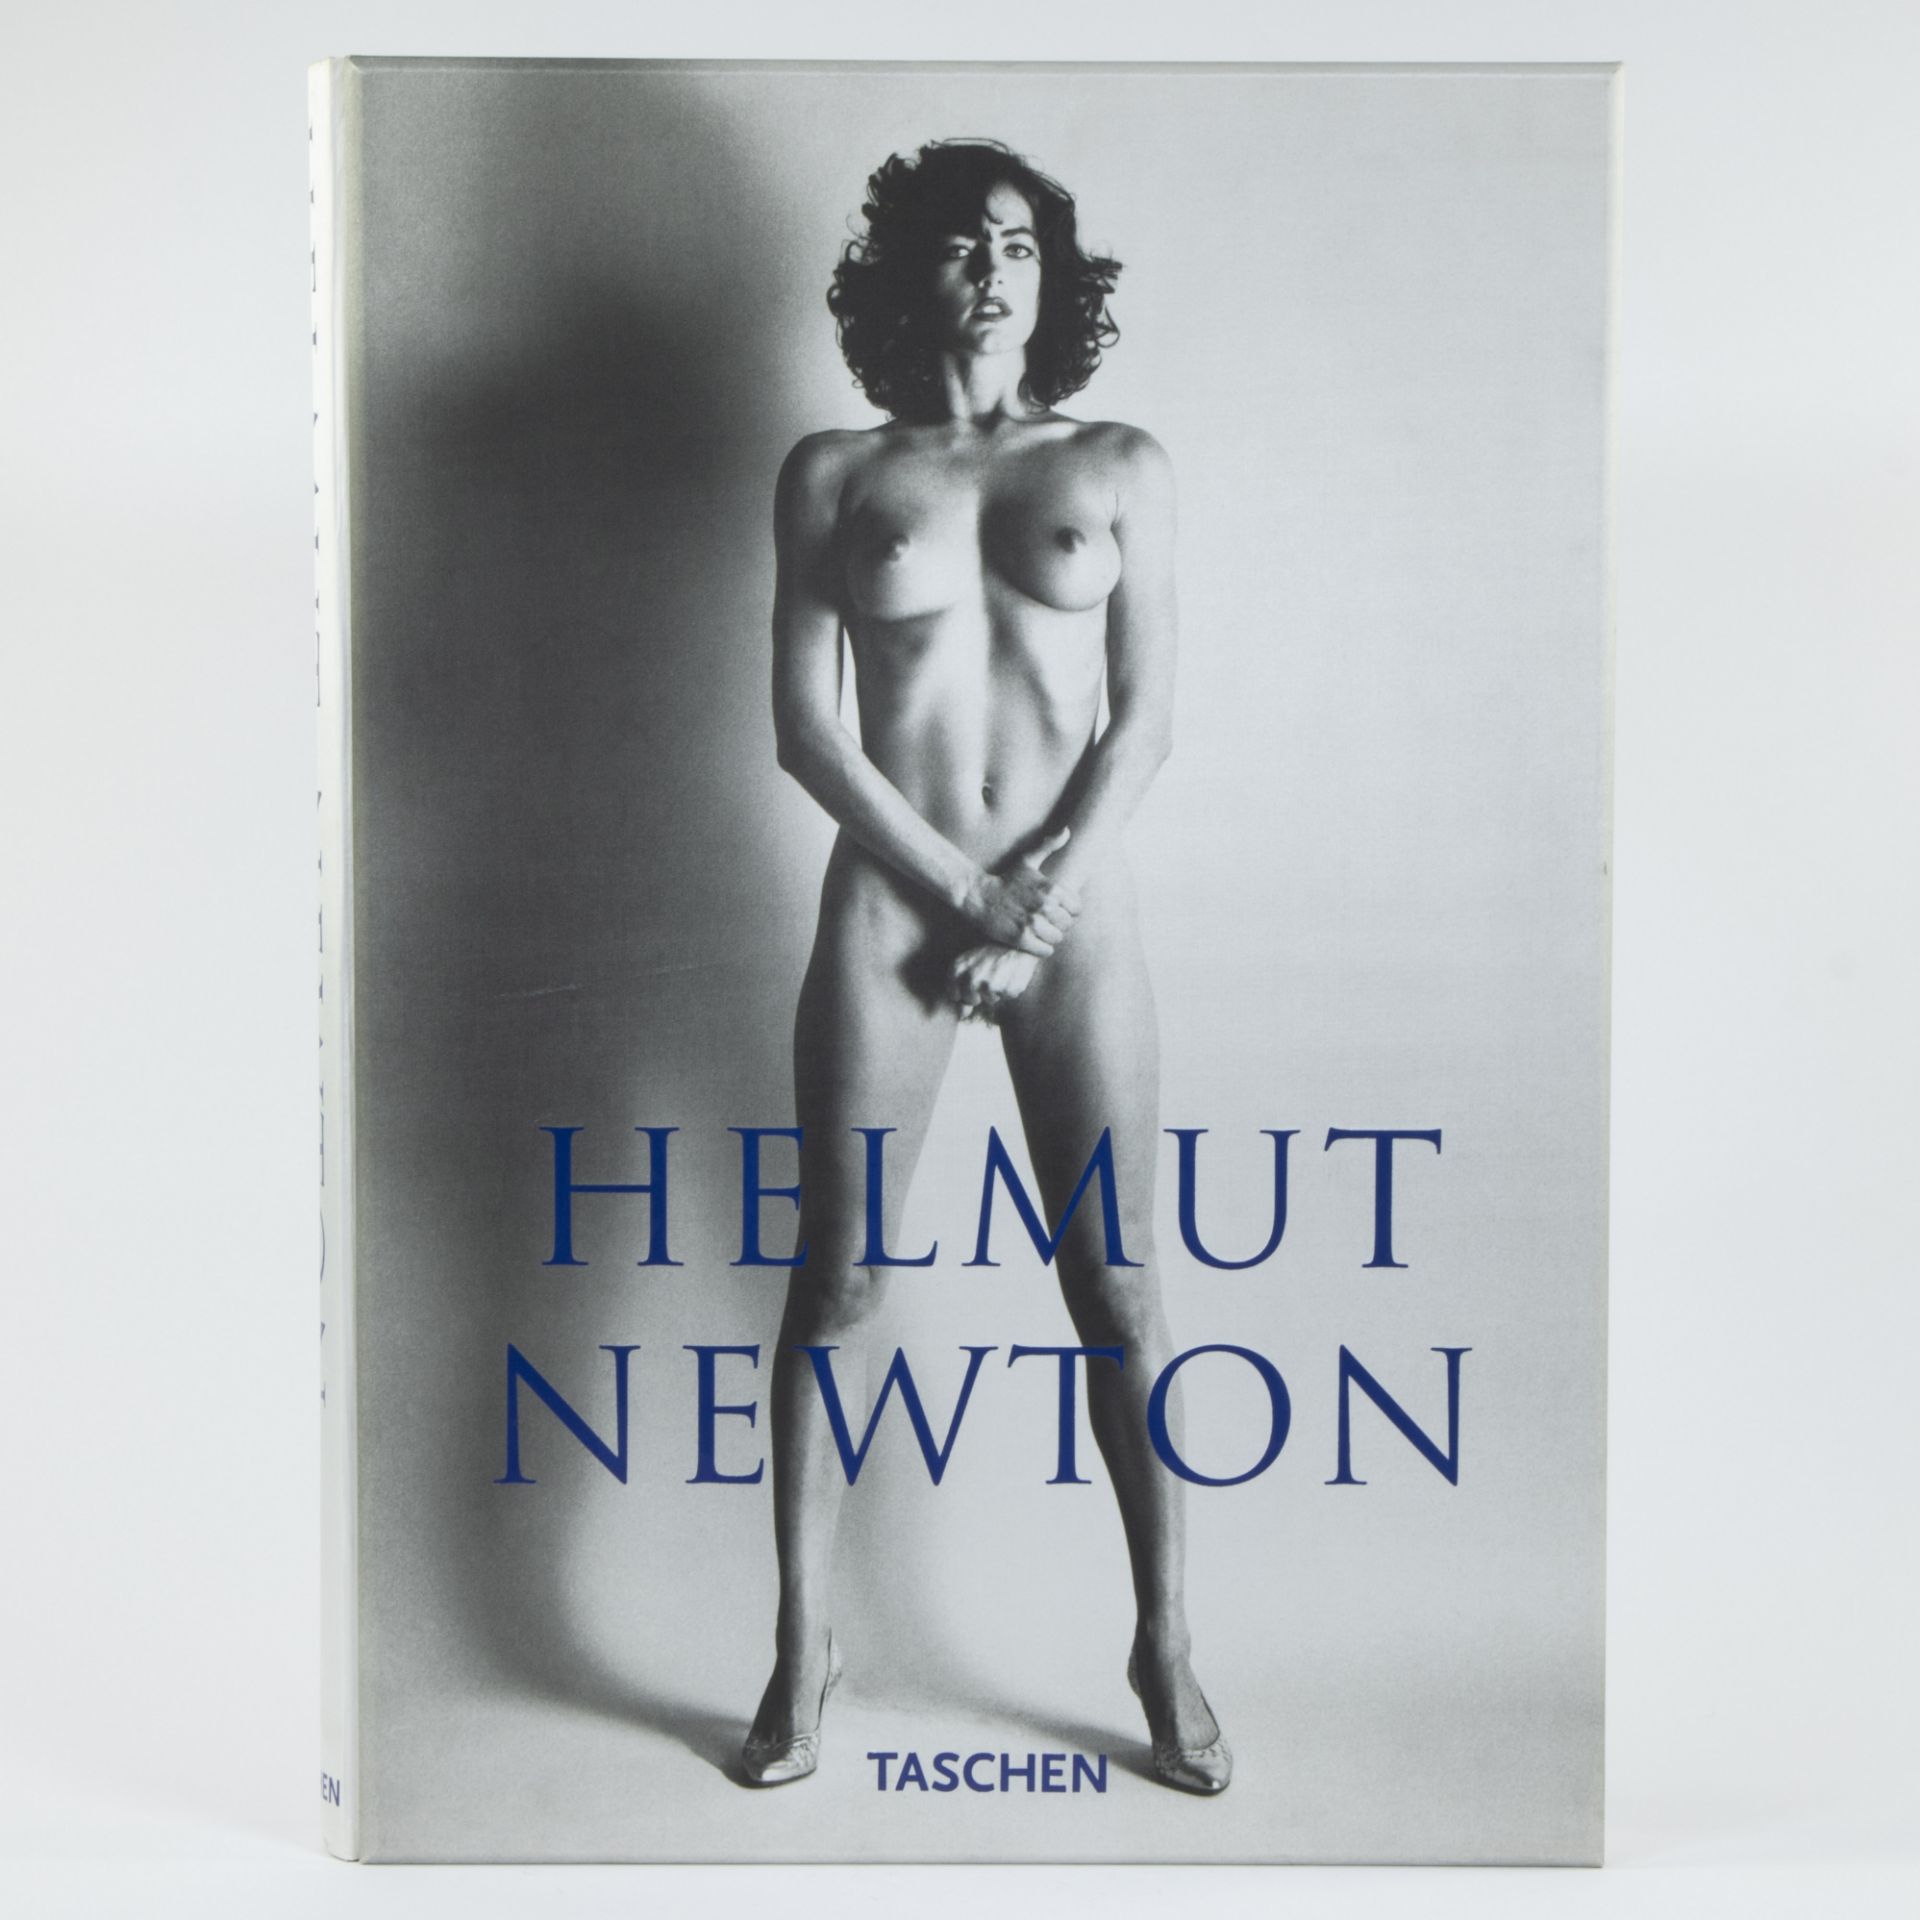 Large pancarte for book by Helmut Newton, publisher Tashen with various black and white photographs